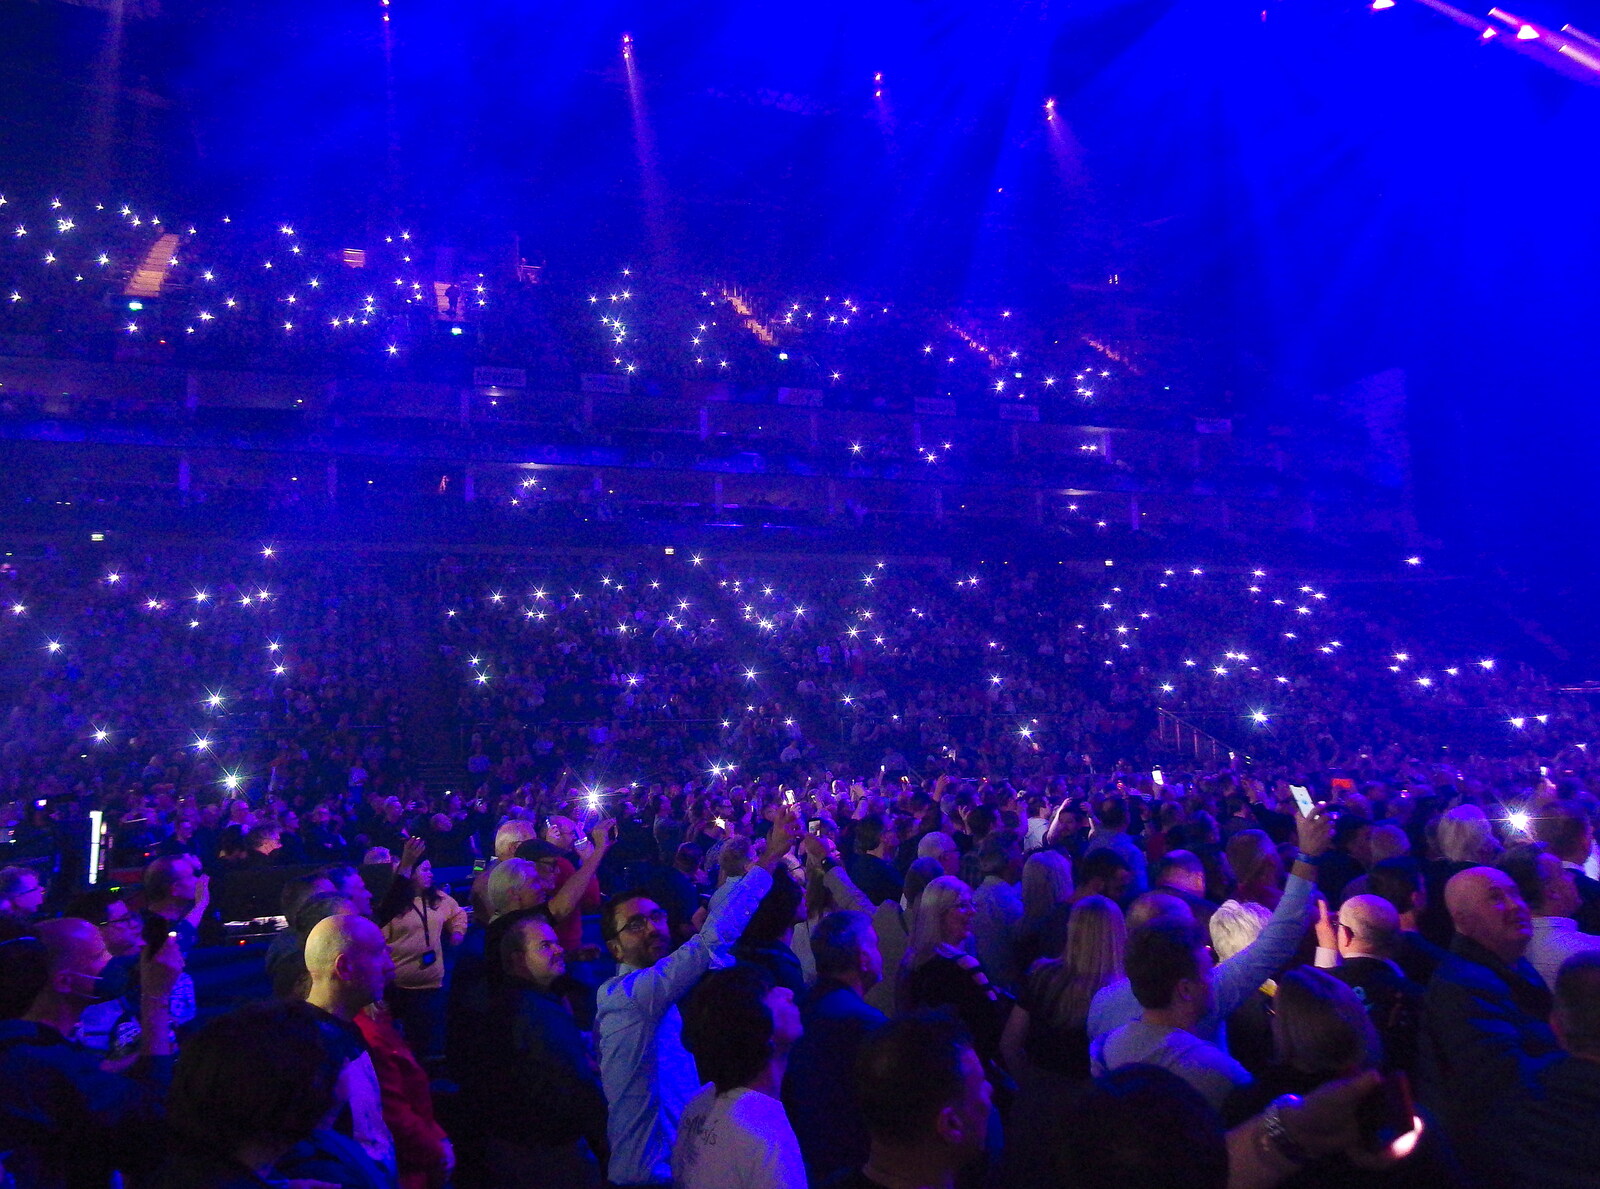 Mobile phones do the job of lighters for a torch song from Genesis at the O2, North Greenwich, London - 24th March 2022